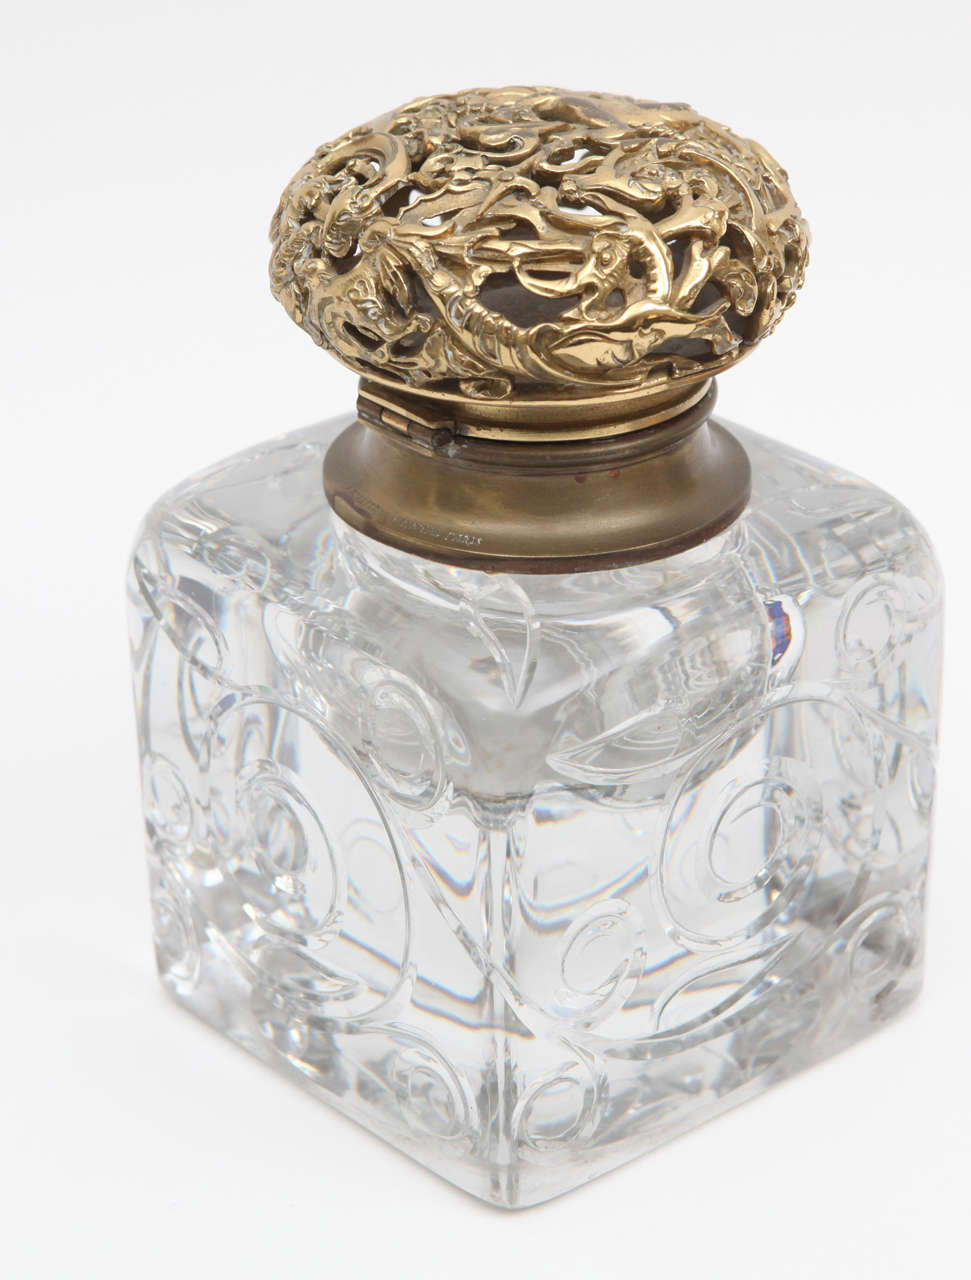 19th century French Crystal and Bronze Mounumental Inkwell. Signed.  Escalier de Cristal Paris.